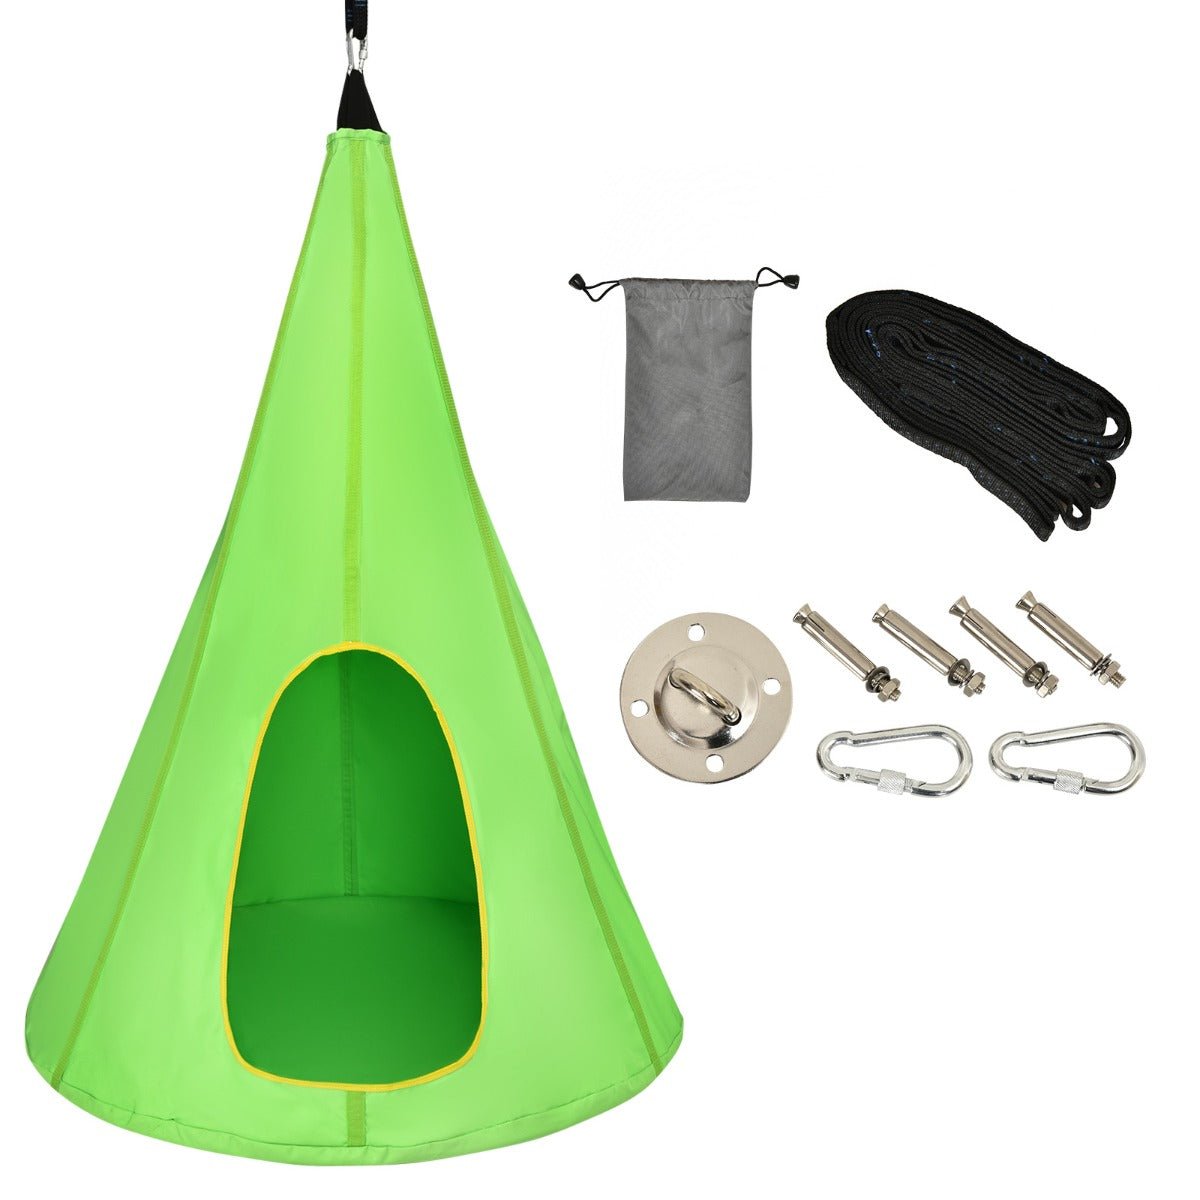 Swing and Immerse: Kids Nest Swing Tent Green 80cm, Experience Green Delight